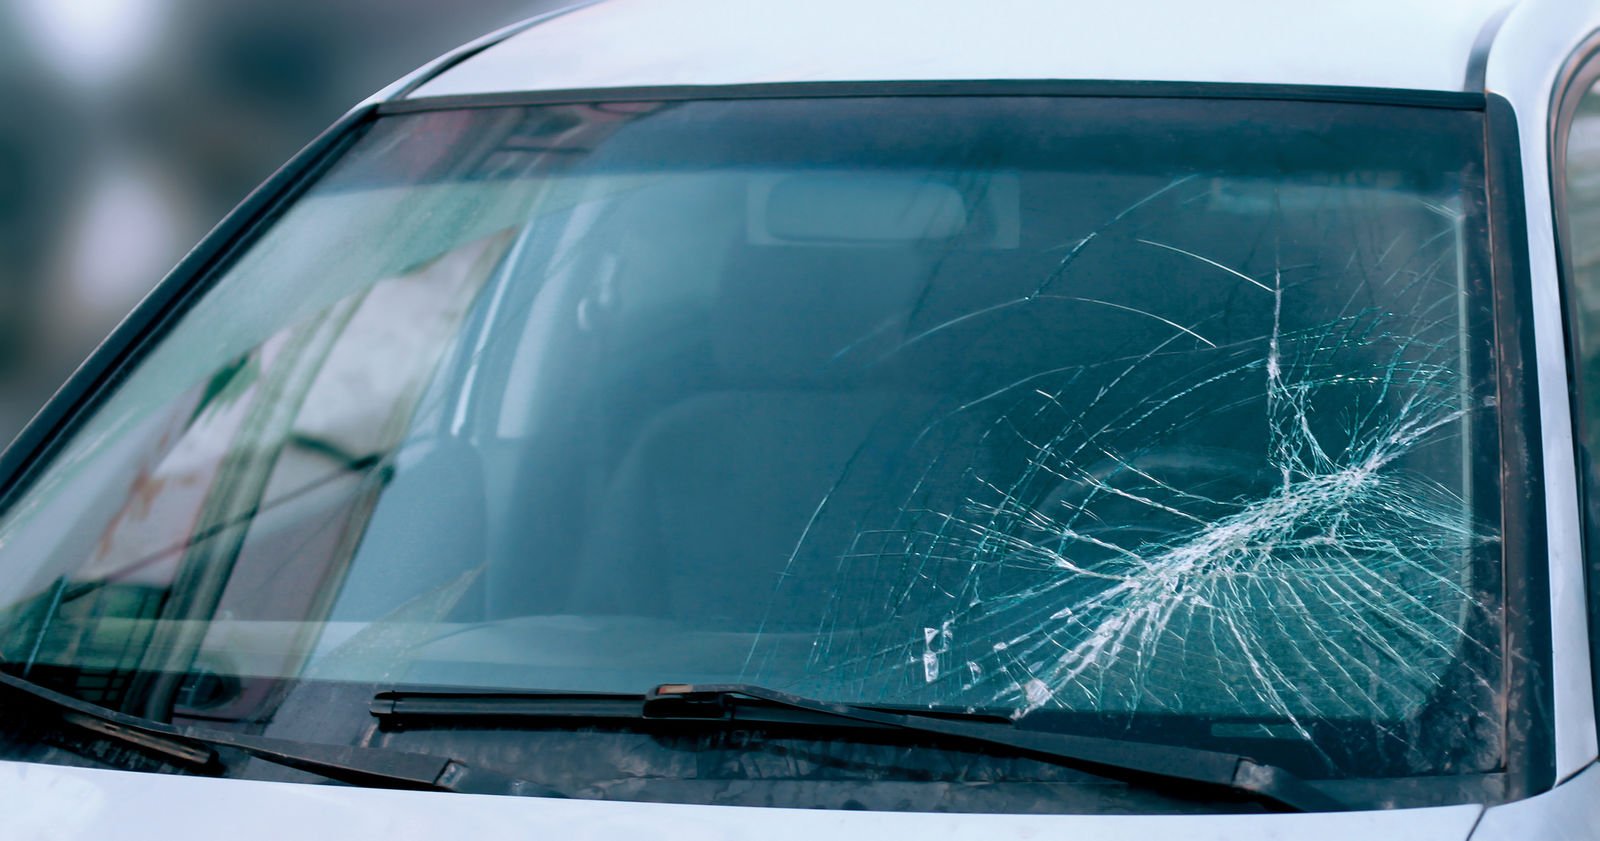 Connecticut Windshield Insurance: What are the Full Glass coverage laws in Connecticut?